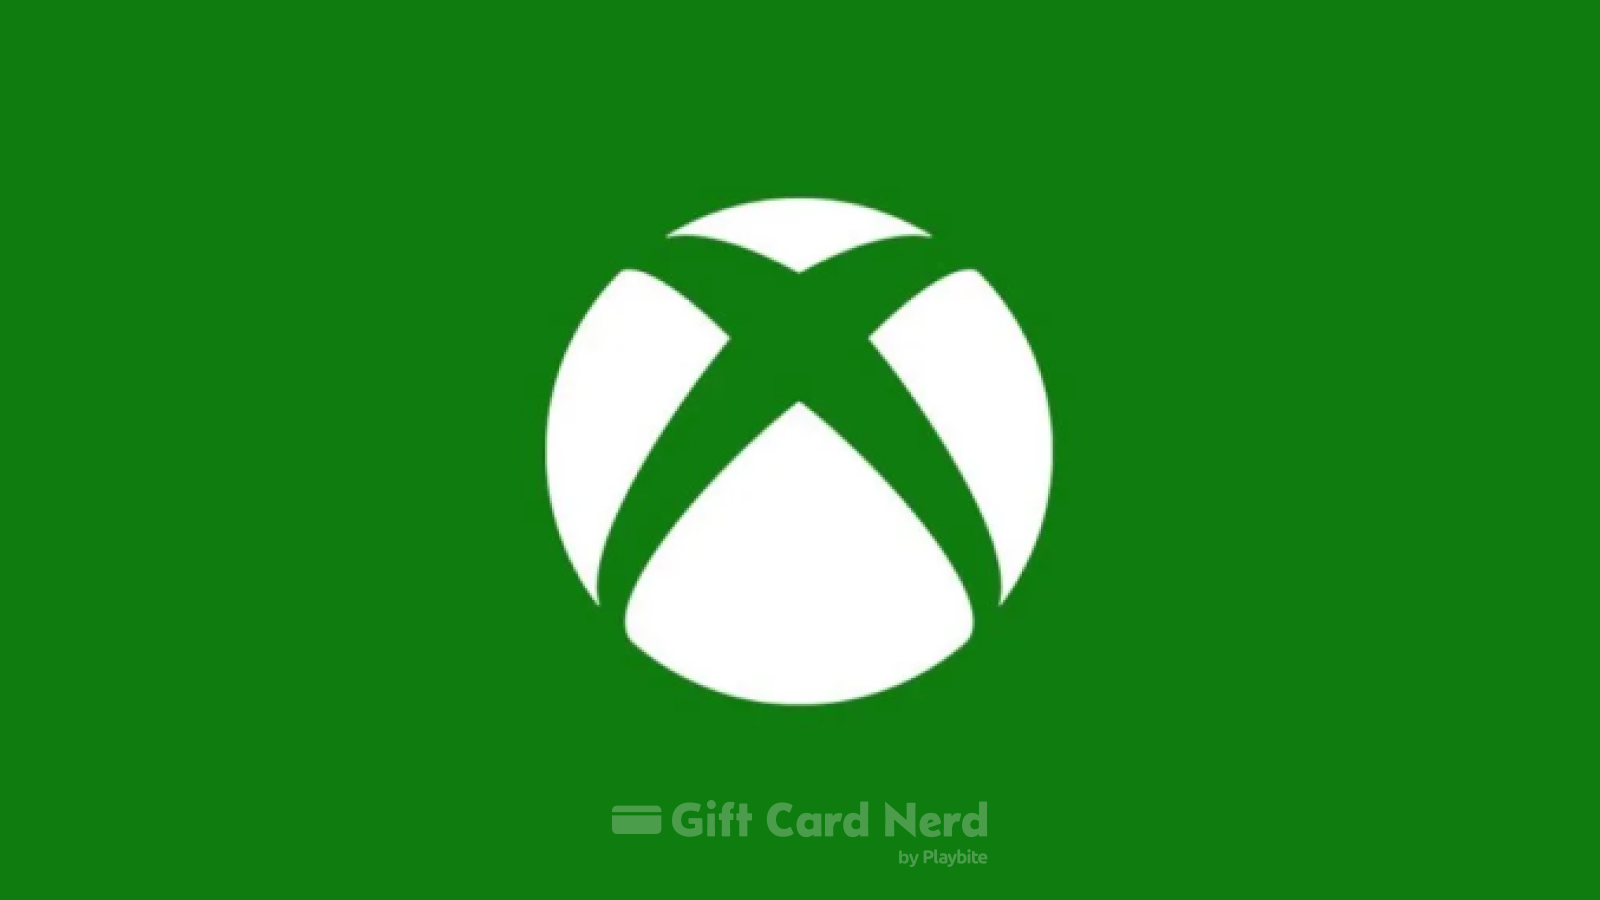 Does Game Stop Sell Xbox Gift Cards?